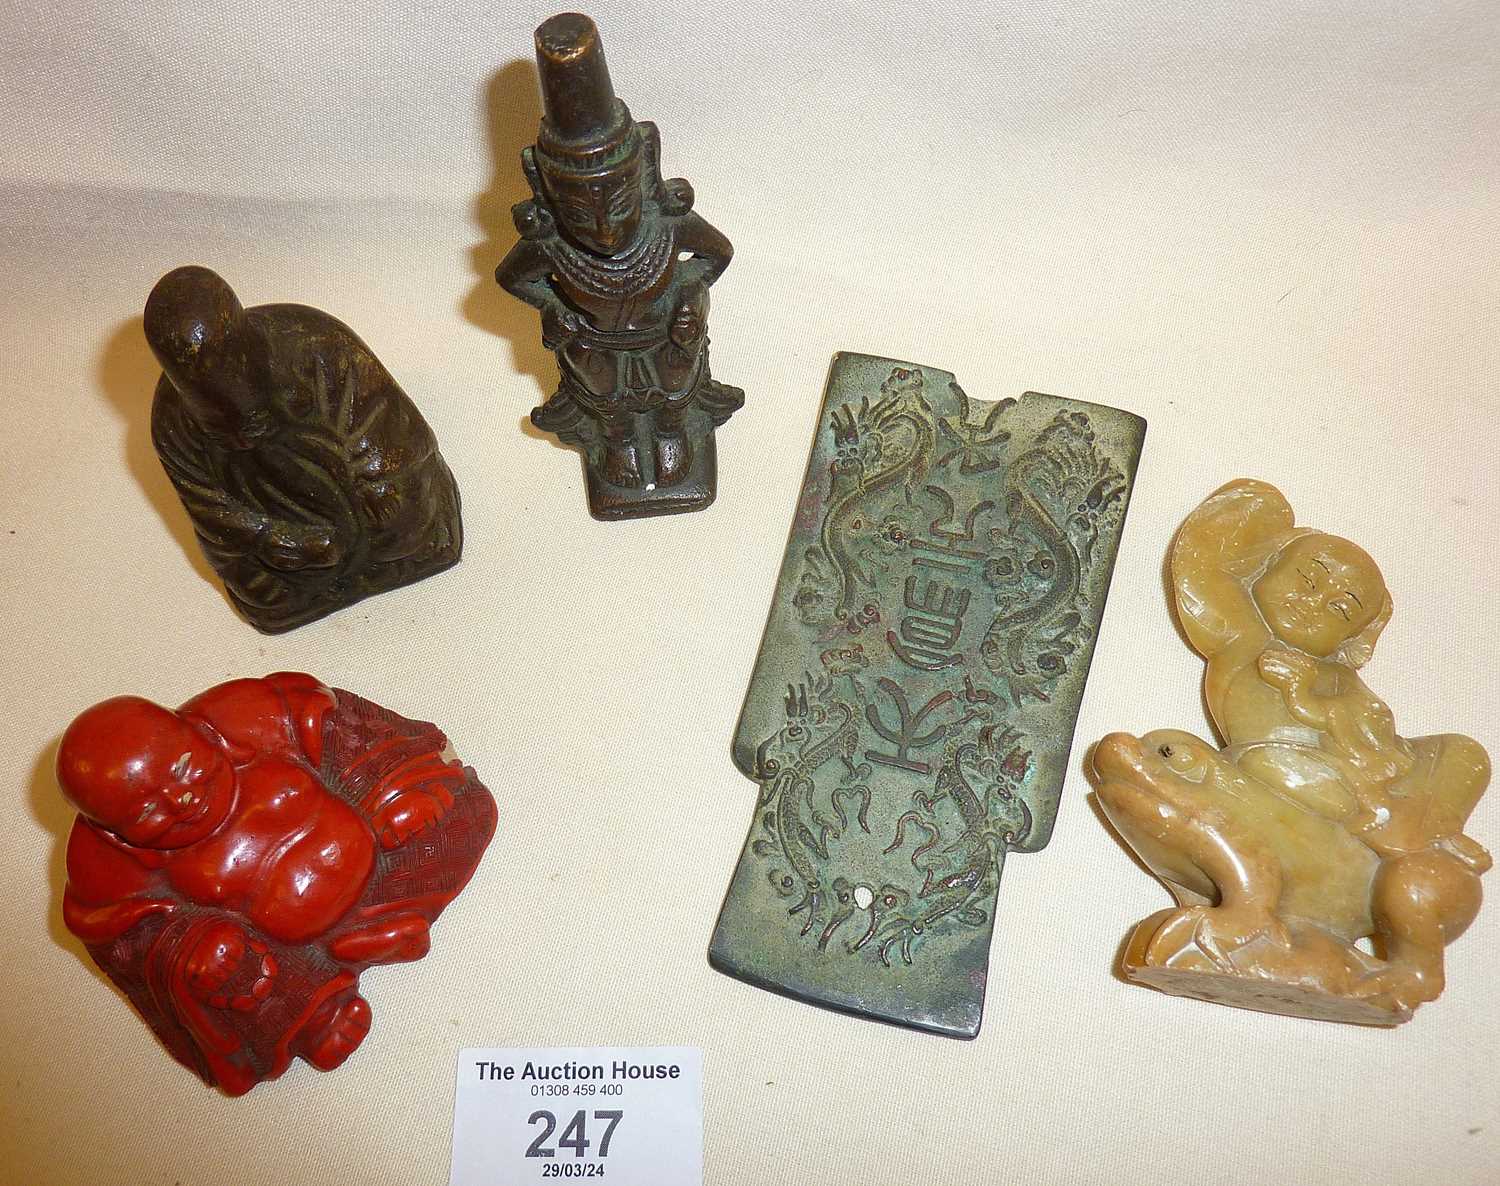 Five various Chinese objects - two buddhas, a bronze figure, small bronze relief plaque and a - Image 4 of 4